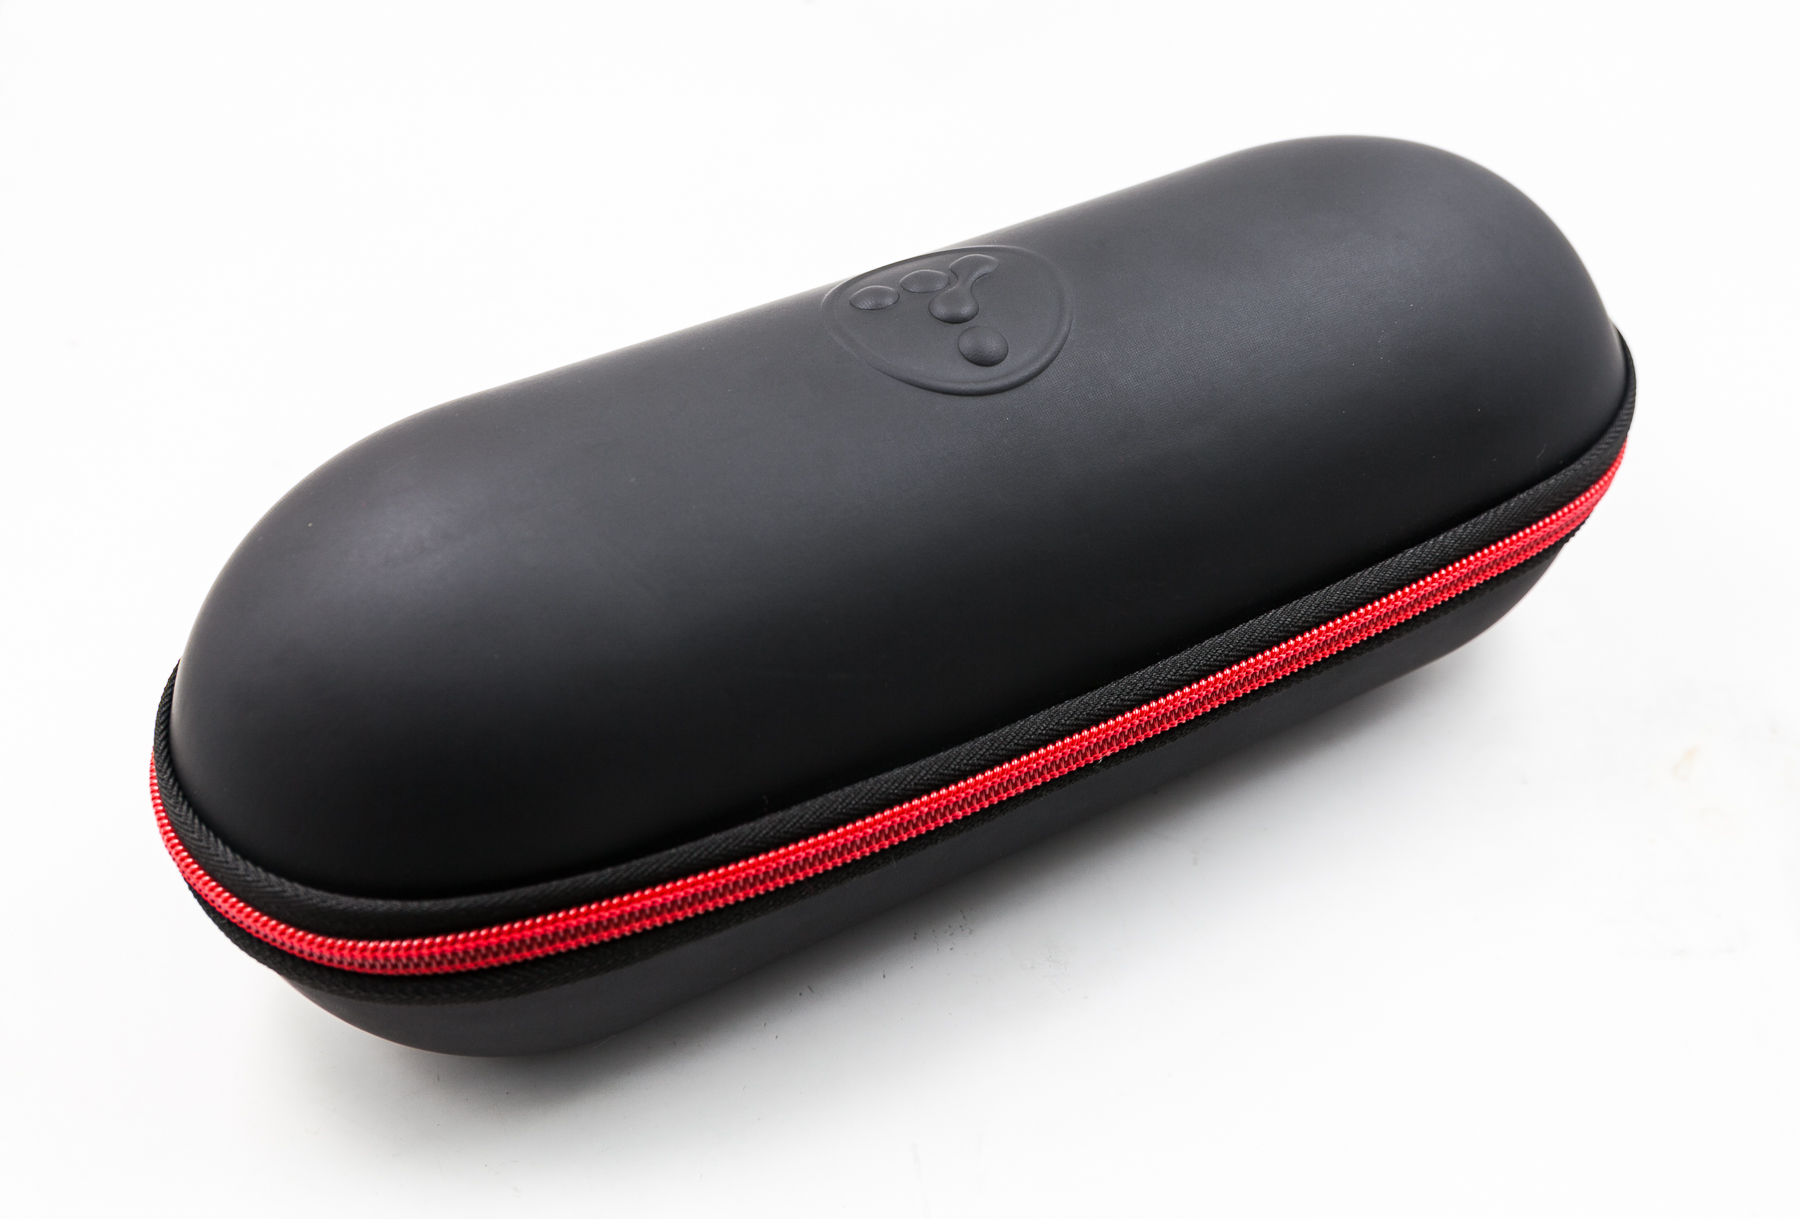 2021 Glasses Case And Storage Flashlight Storage Box, Printed on The outside of The LOGO, Zip Type Box